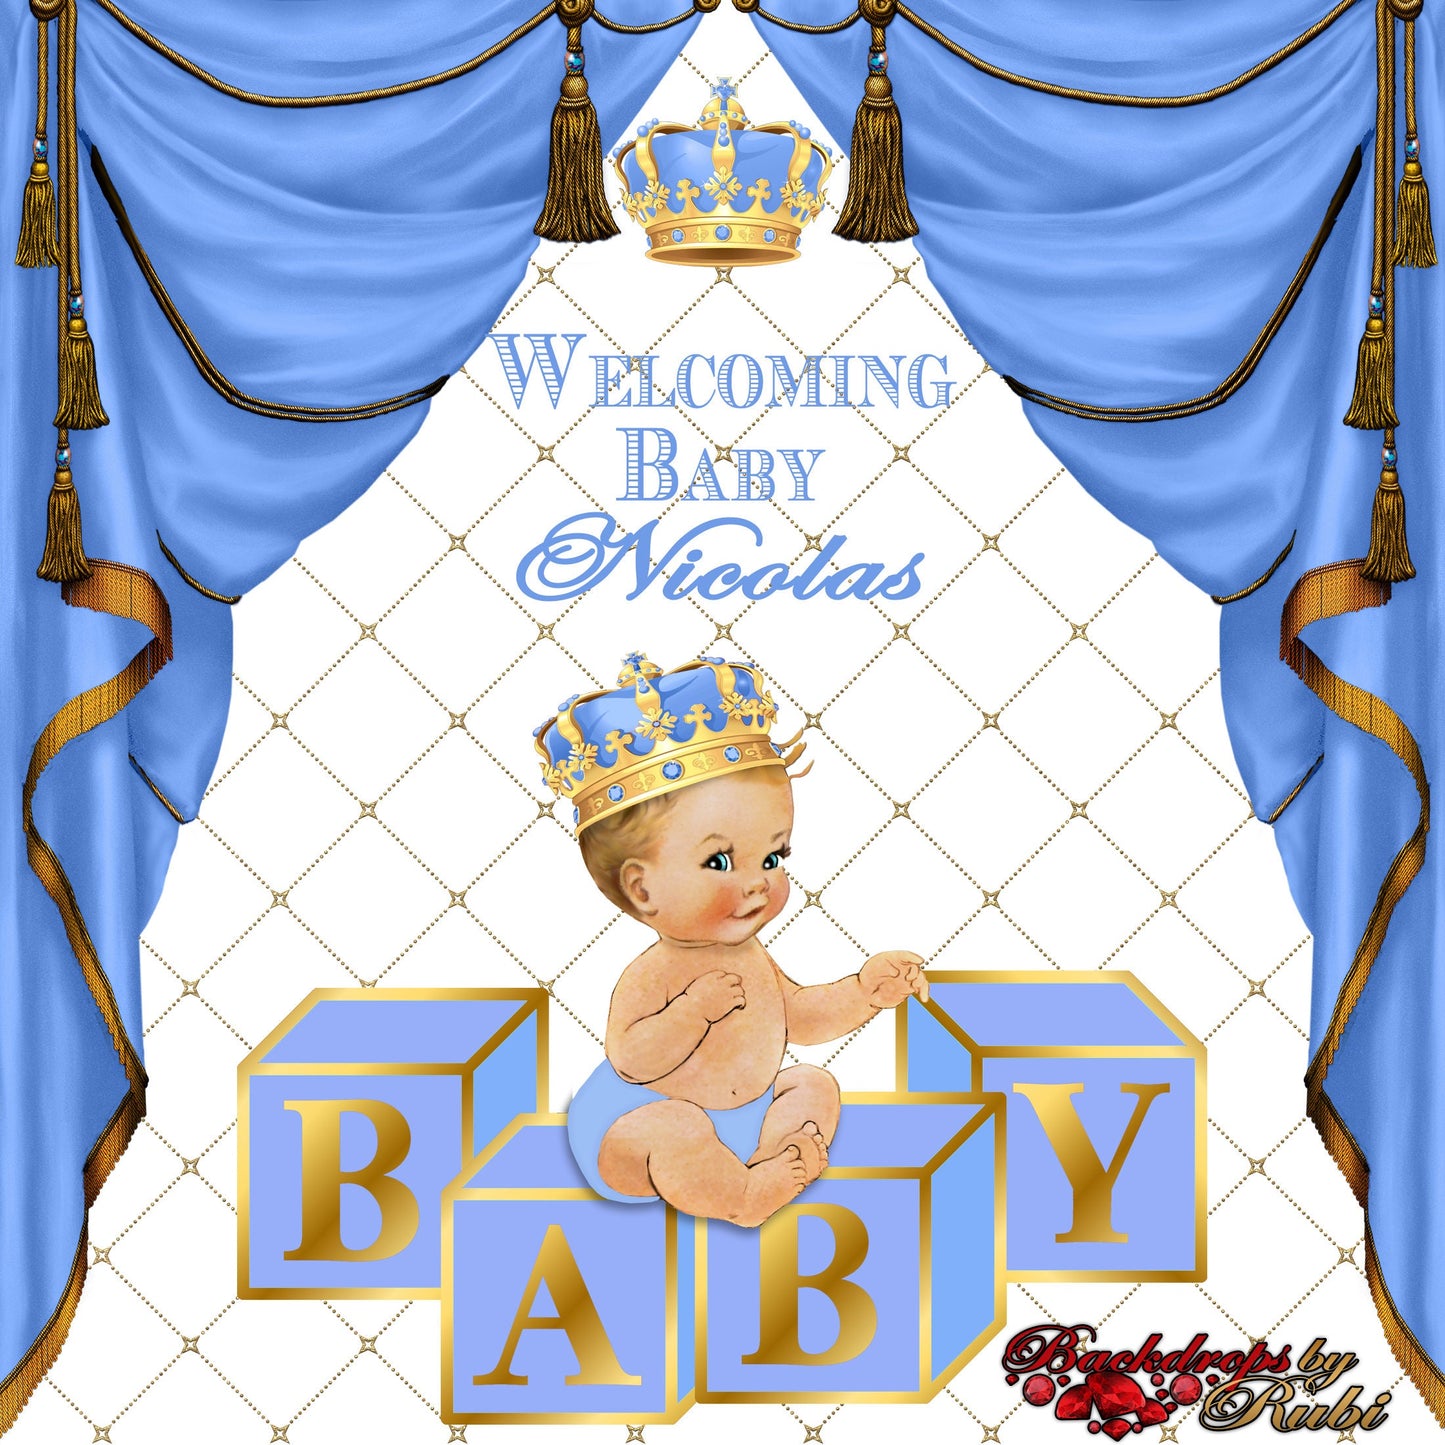 Baby Blue Prince Backdrop, Baby Blue Crown, Baby Blue Prince Baby Shower Photo Backdrop, Baby Blue Prince Backdrop, Baby Blue Little Prince